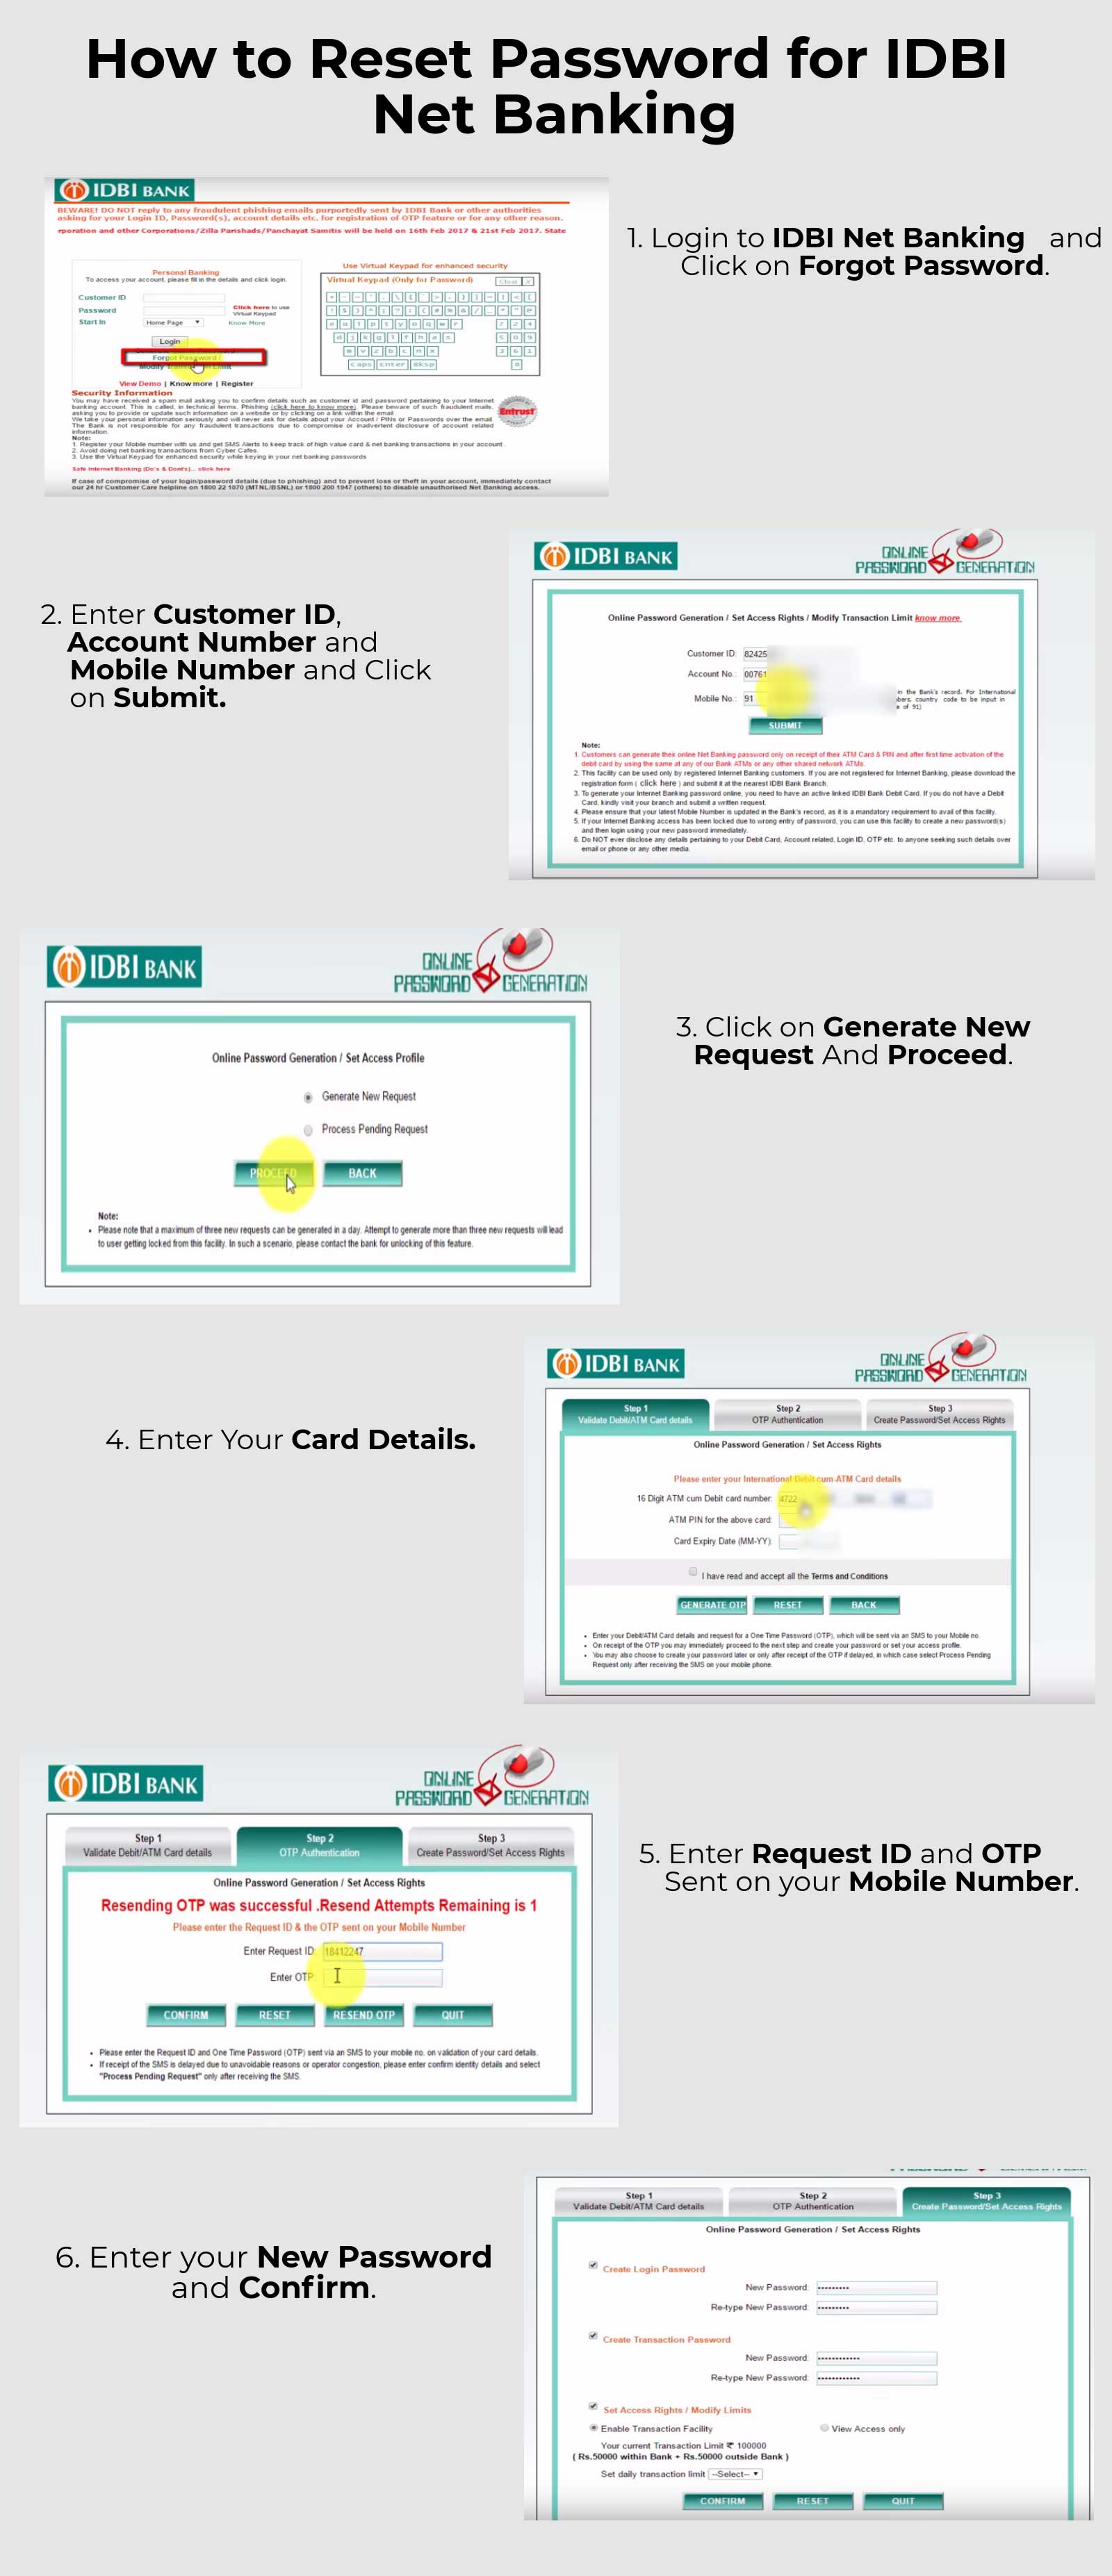 
                       1.   Login to IDBI Net Banking and Click on Forgot Password.
2.  Enter Customer ID, Account Number and Mobile Number and click on submit.
3.  Click on Generate New Request and Proceed.
4.  Enter Your Card Details.
5.  Enter Request ID and OTP Sent on your Mobile Number.
6.  Enter your New Password and Confirm.
                        